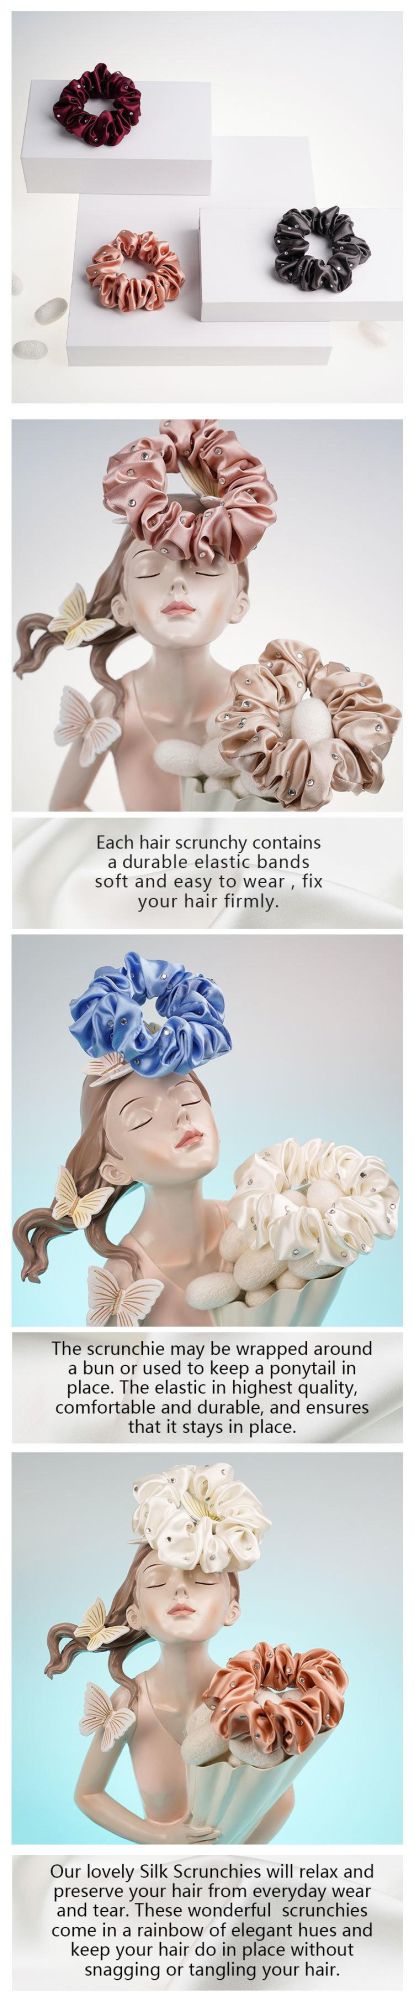 Wholesale Crystal Silk Scrunchies in High Quality for Girls Luxury